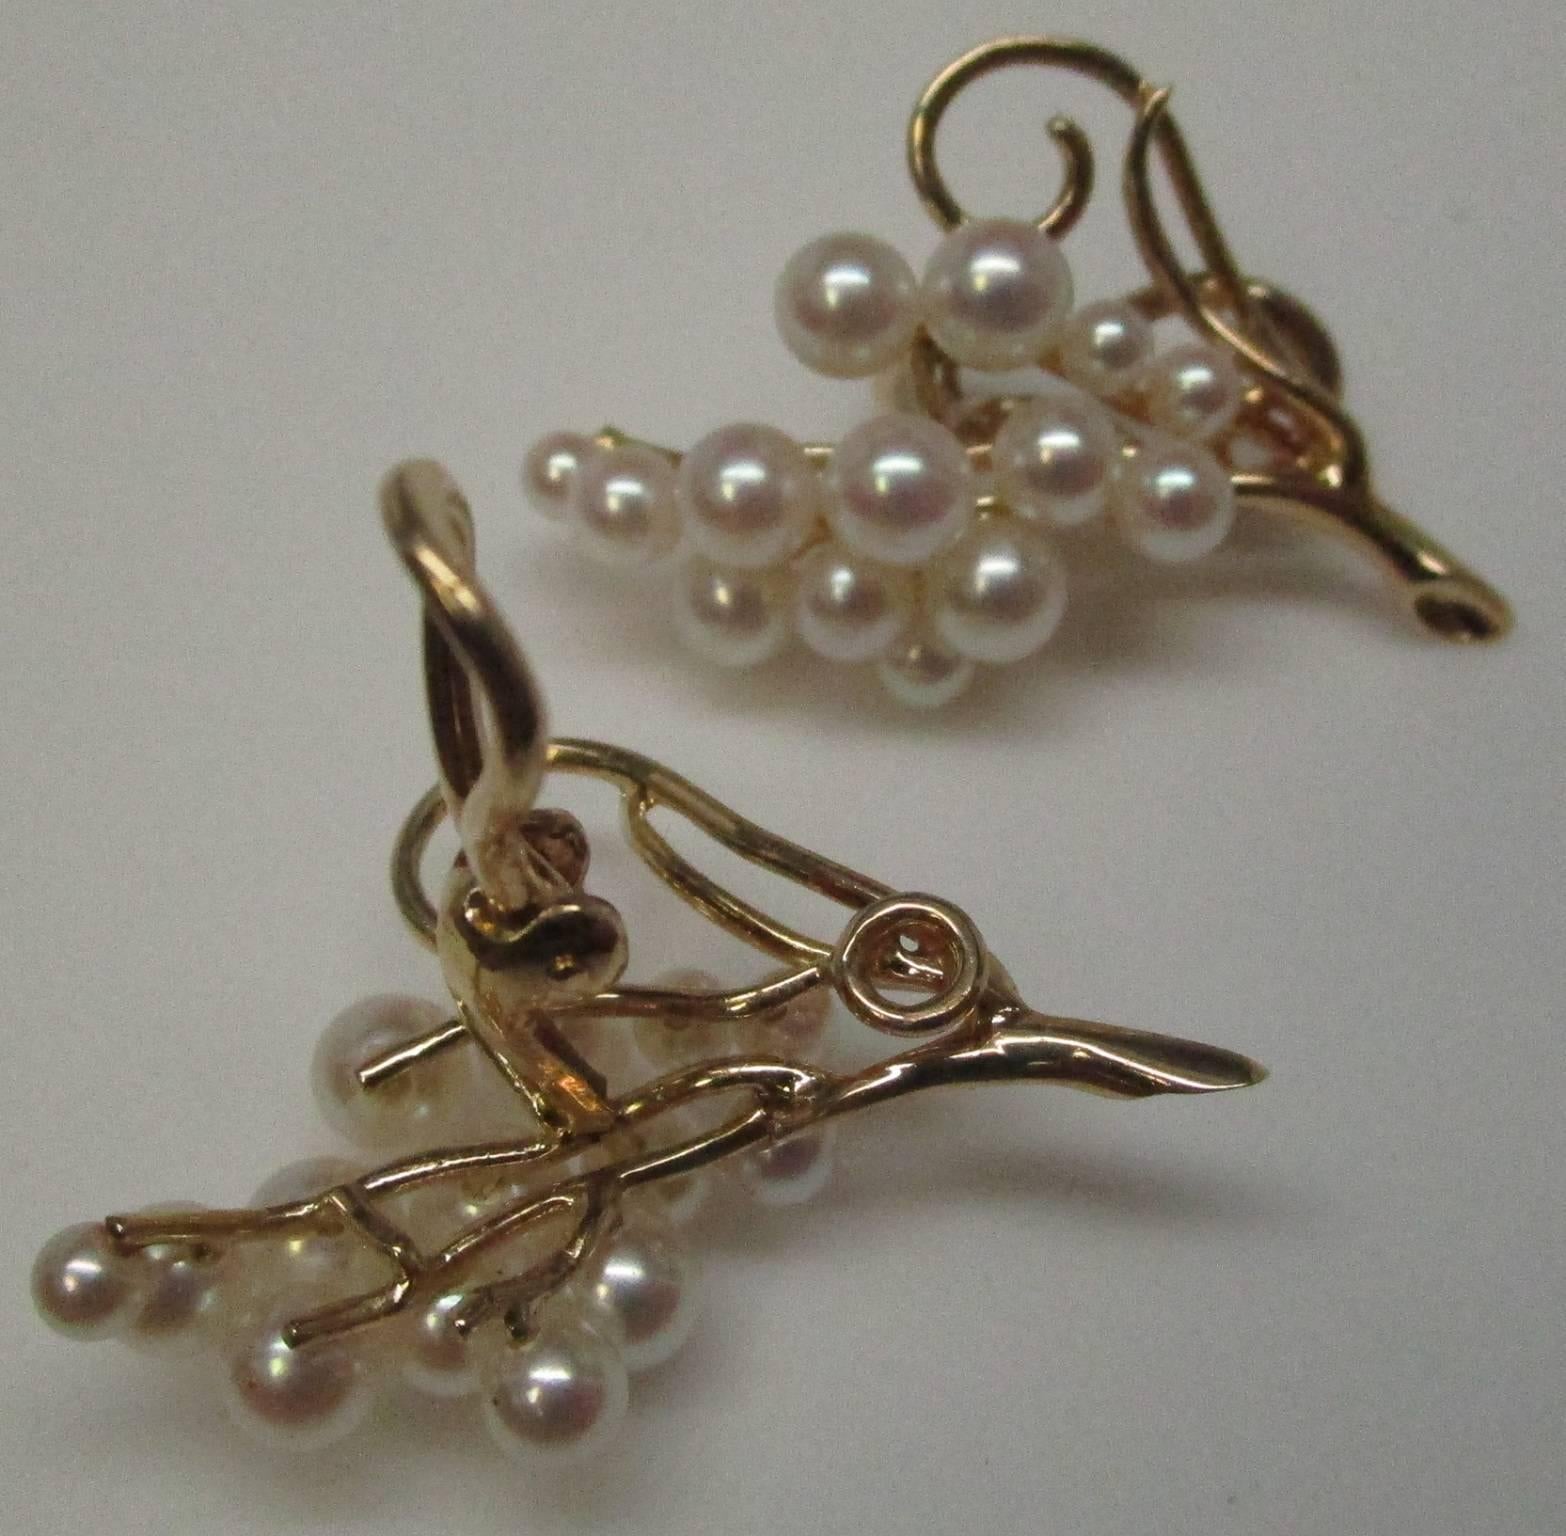 These earrings embody the absolute essence of luxury-- being hand-fed grapes from the vine. The cluster of pearls resembles a bunch of grapes on a 14 karat yellow gold vine. The vine has an elegant swirl that makes them seem lifelike. They are